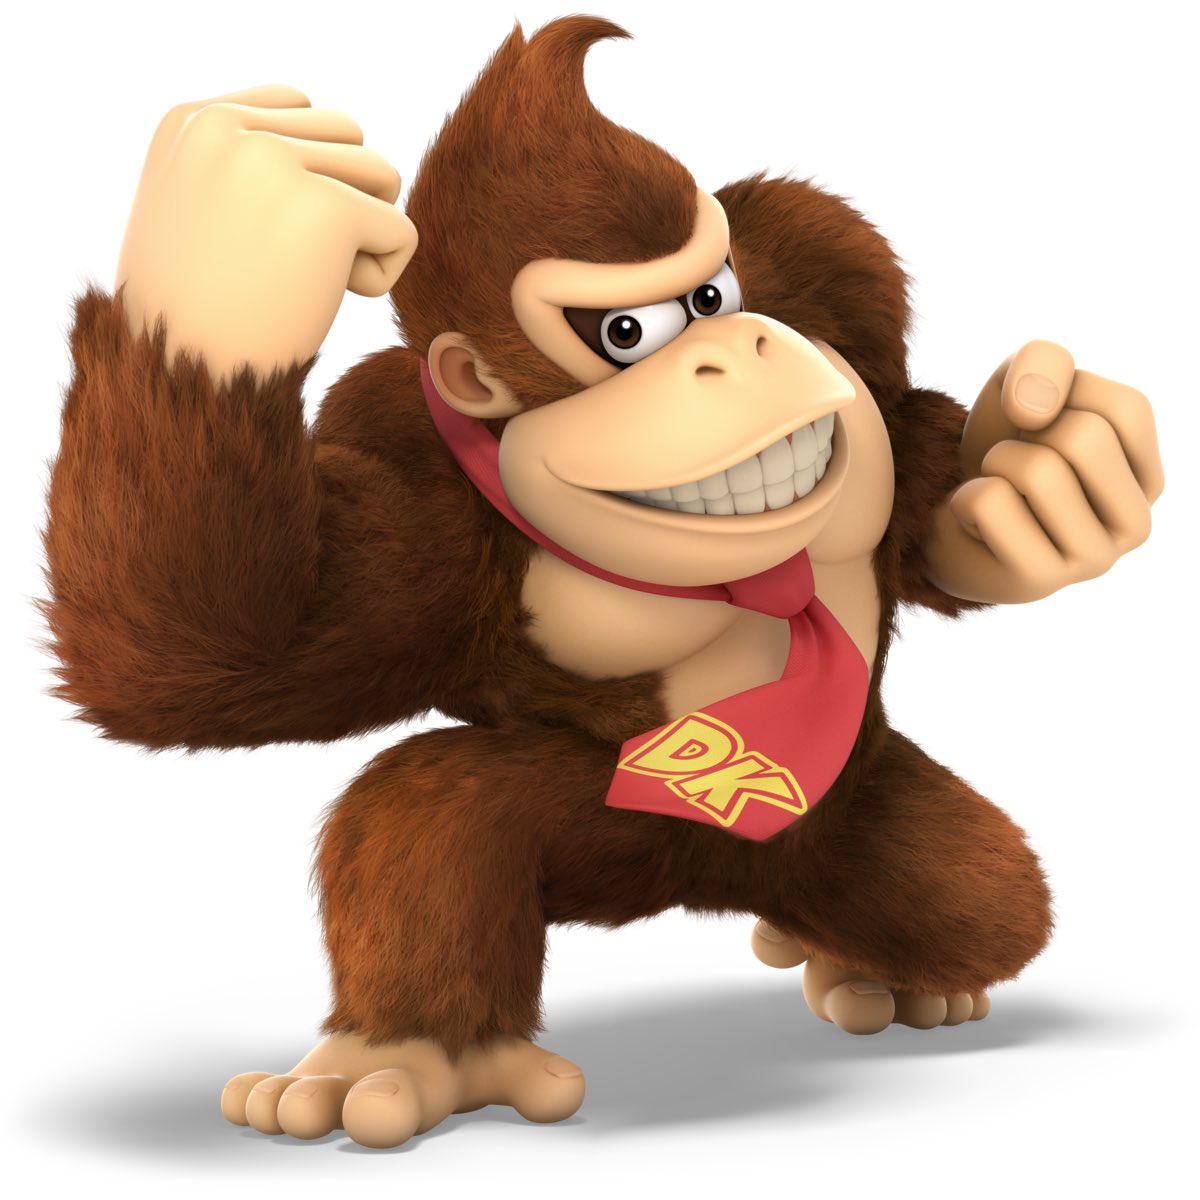 Donkey Kong Mains: DK Mains are the same as Mario Mains but are more so fulled off dank memes and making their opponents laugh at some of DK’a pretty absurd kill confirms. If they aren’t dominating and EXPANDING DONG. Their stage spiking you with Cargo Throw and its always funny